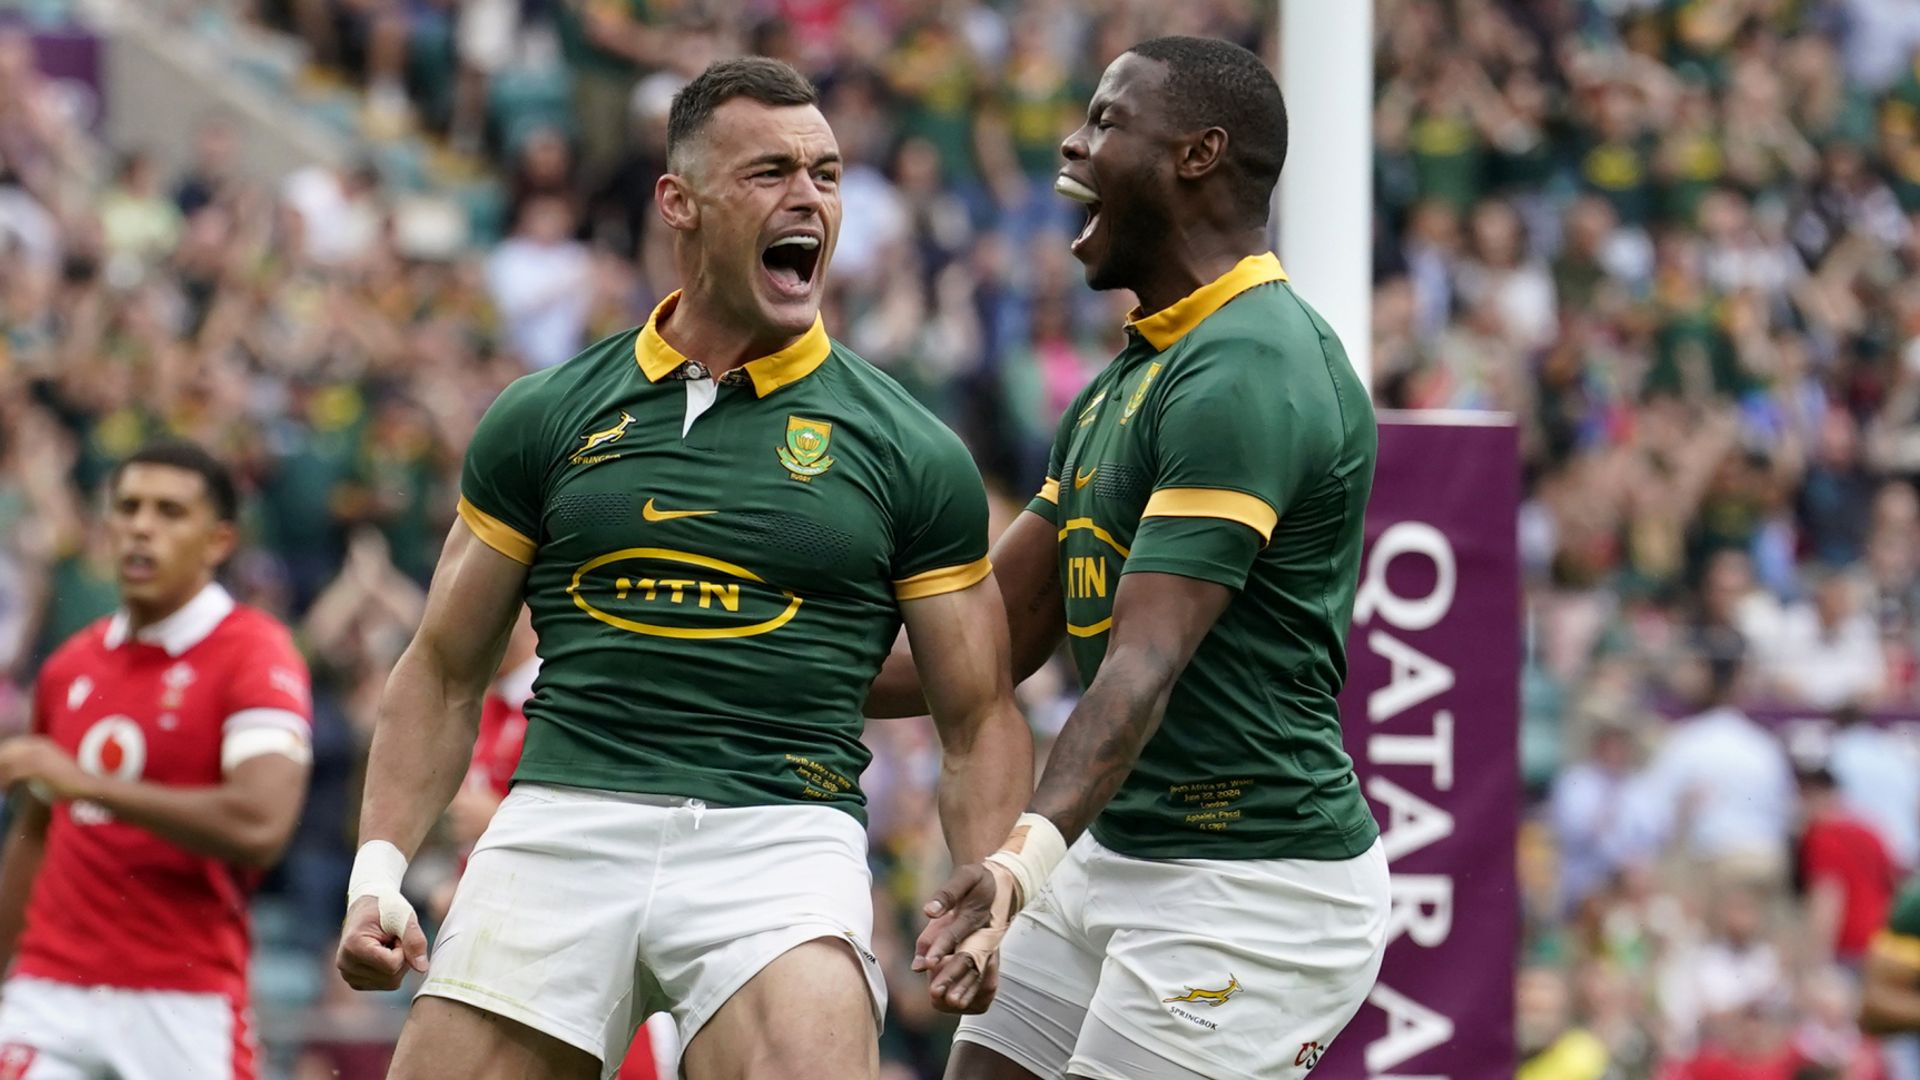 Springboks eventually prove too strong for Wales at Twickenham